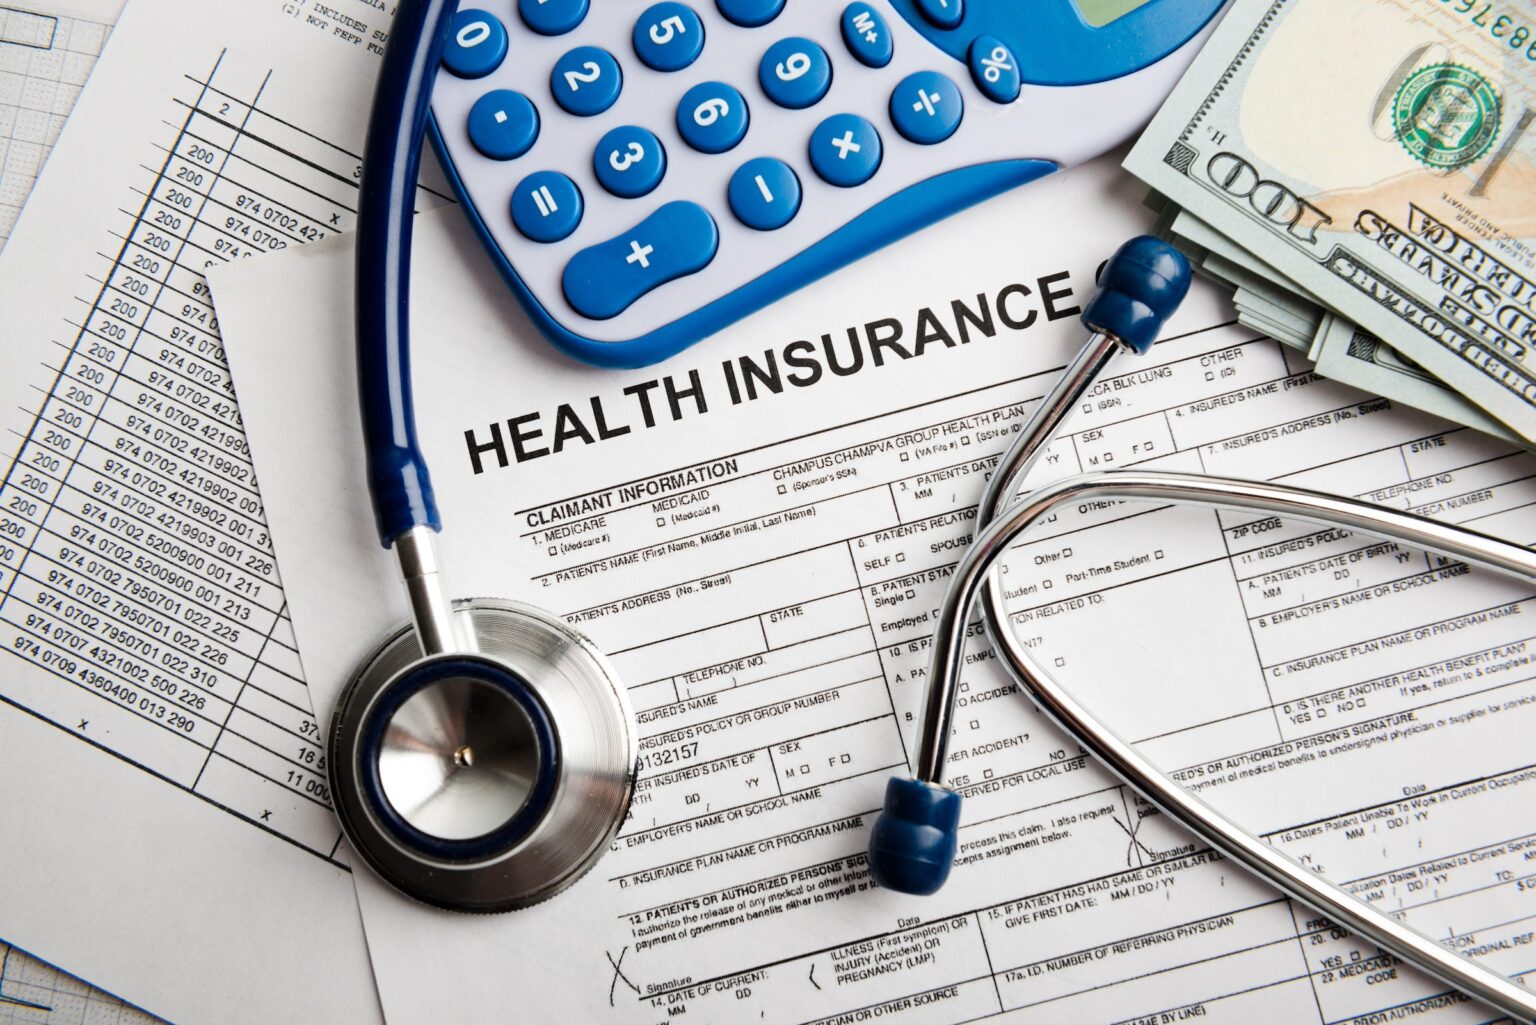 We'll take a closer look at the rise in Indian healthcare costs and whether your existing health insurance provides sufficient financial protection.